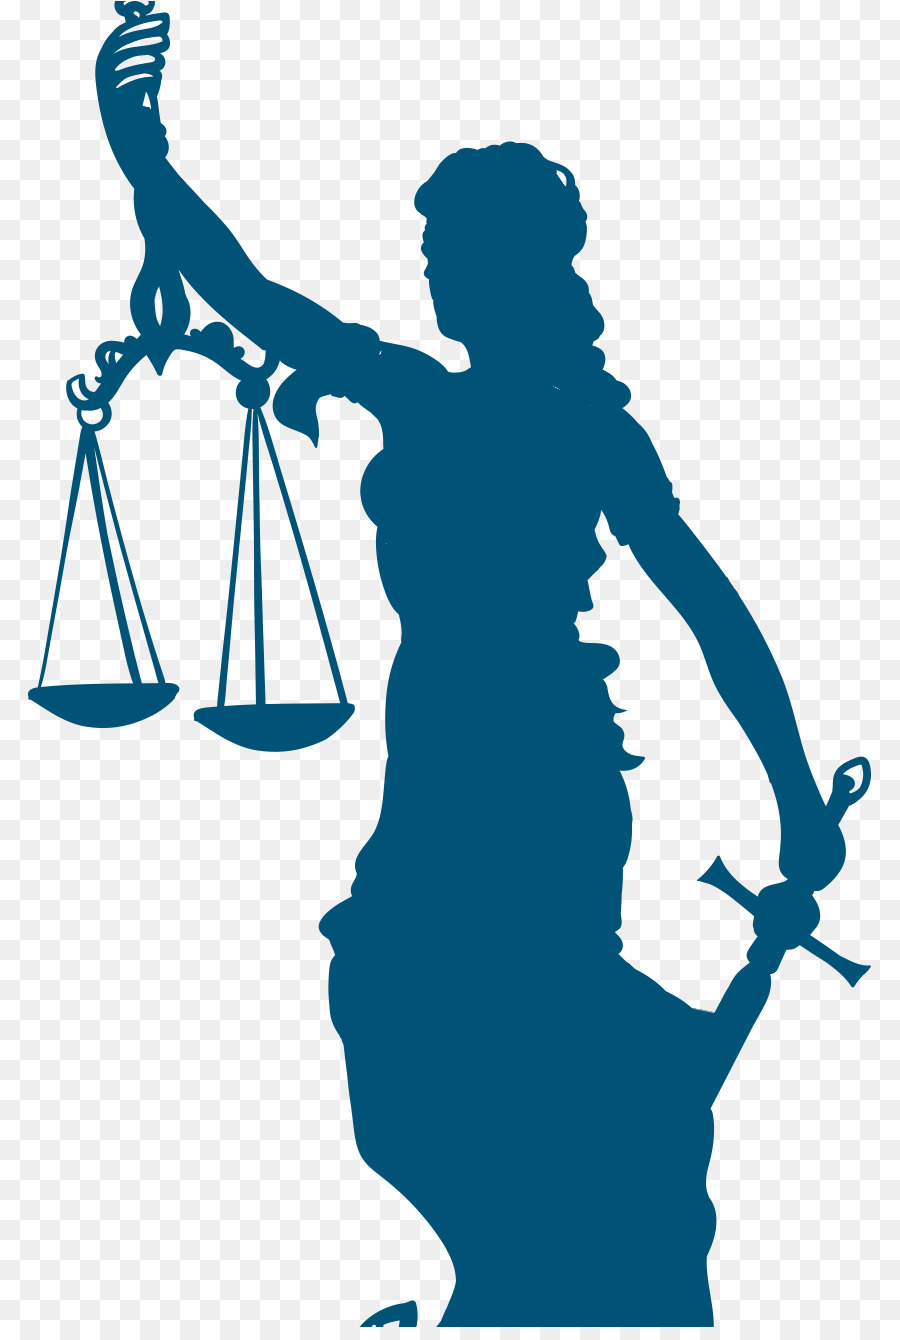 Lady Justice Silhouette